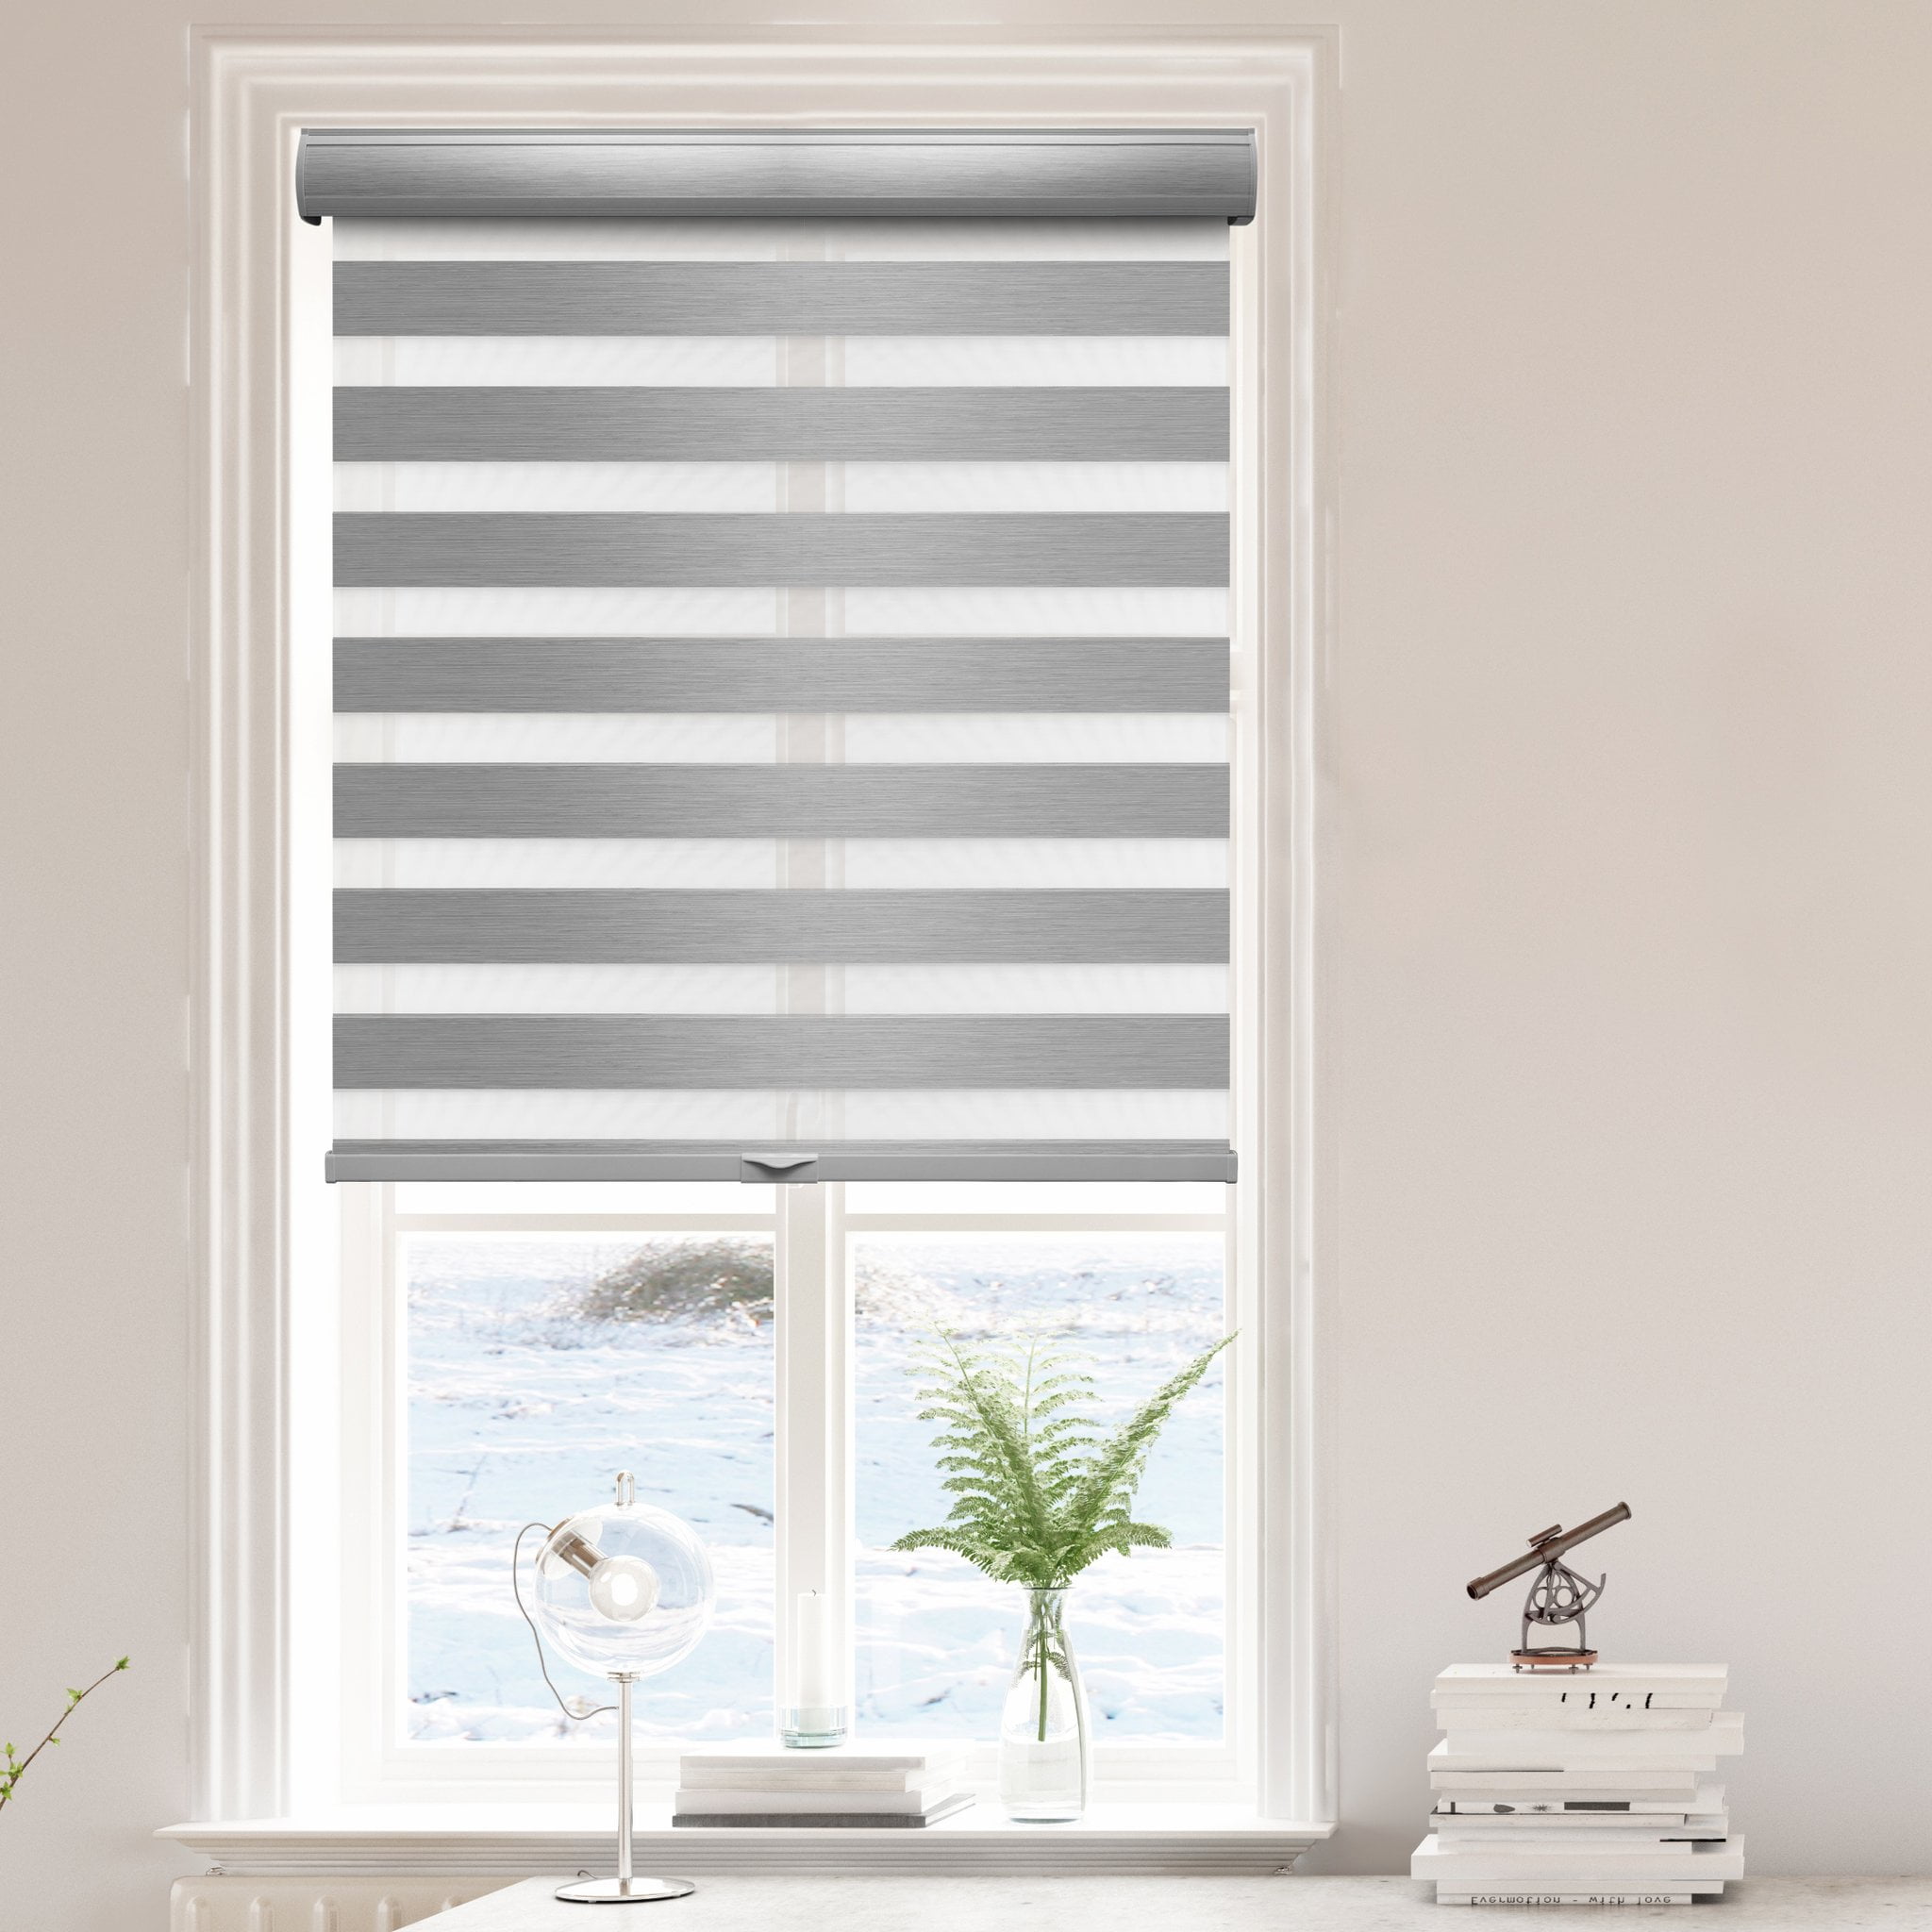 46"x72" Cordless Blackout Roller Shades Free-Stop Dual Layer Zebra Blinds 